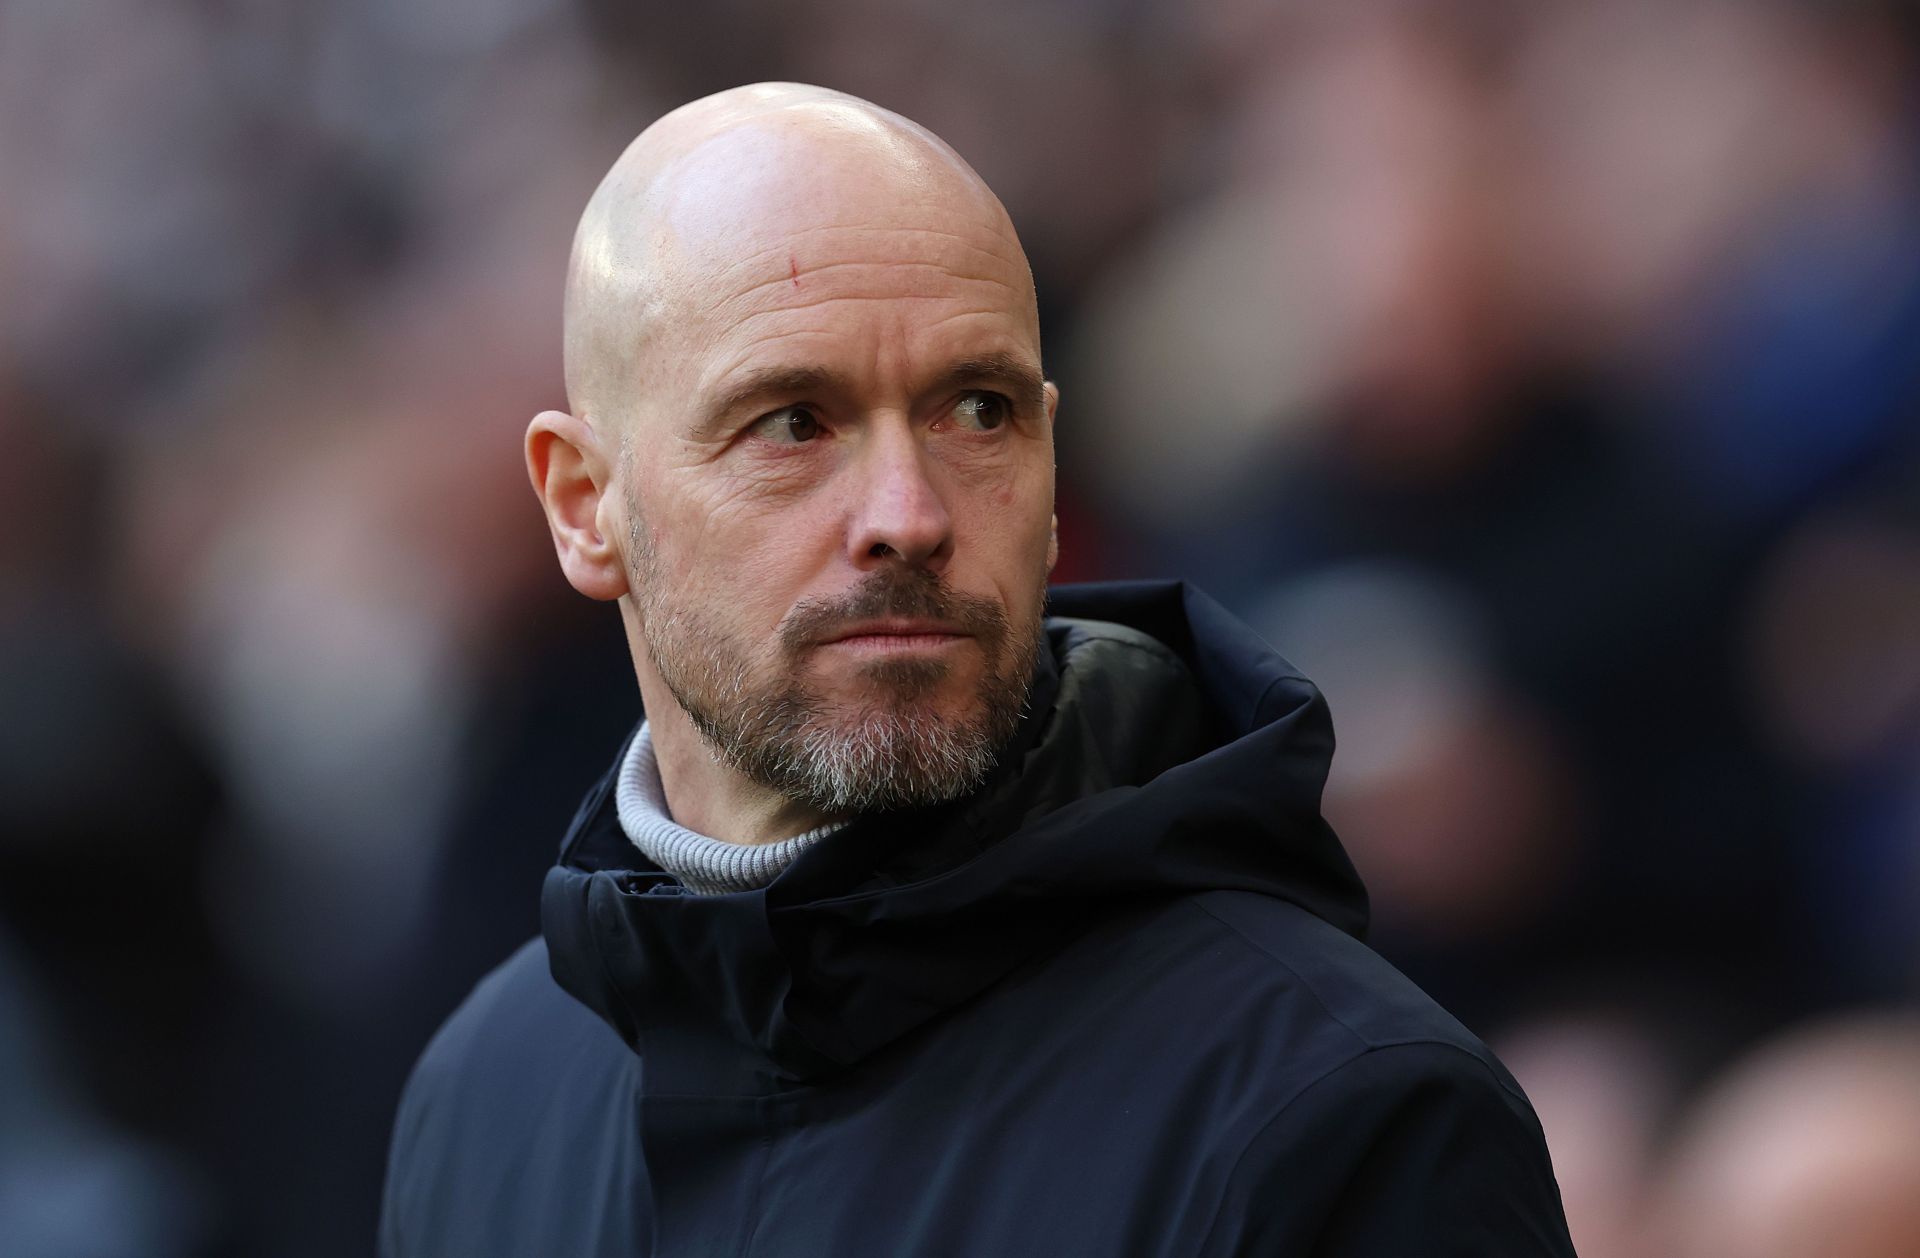 Ten Hag claims that he and his Red Devils are in the same boat.